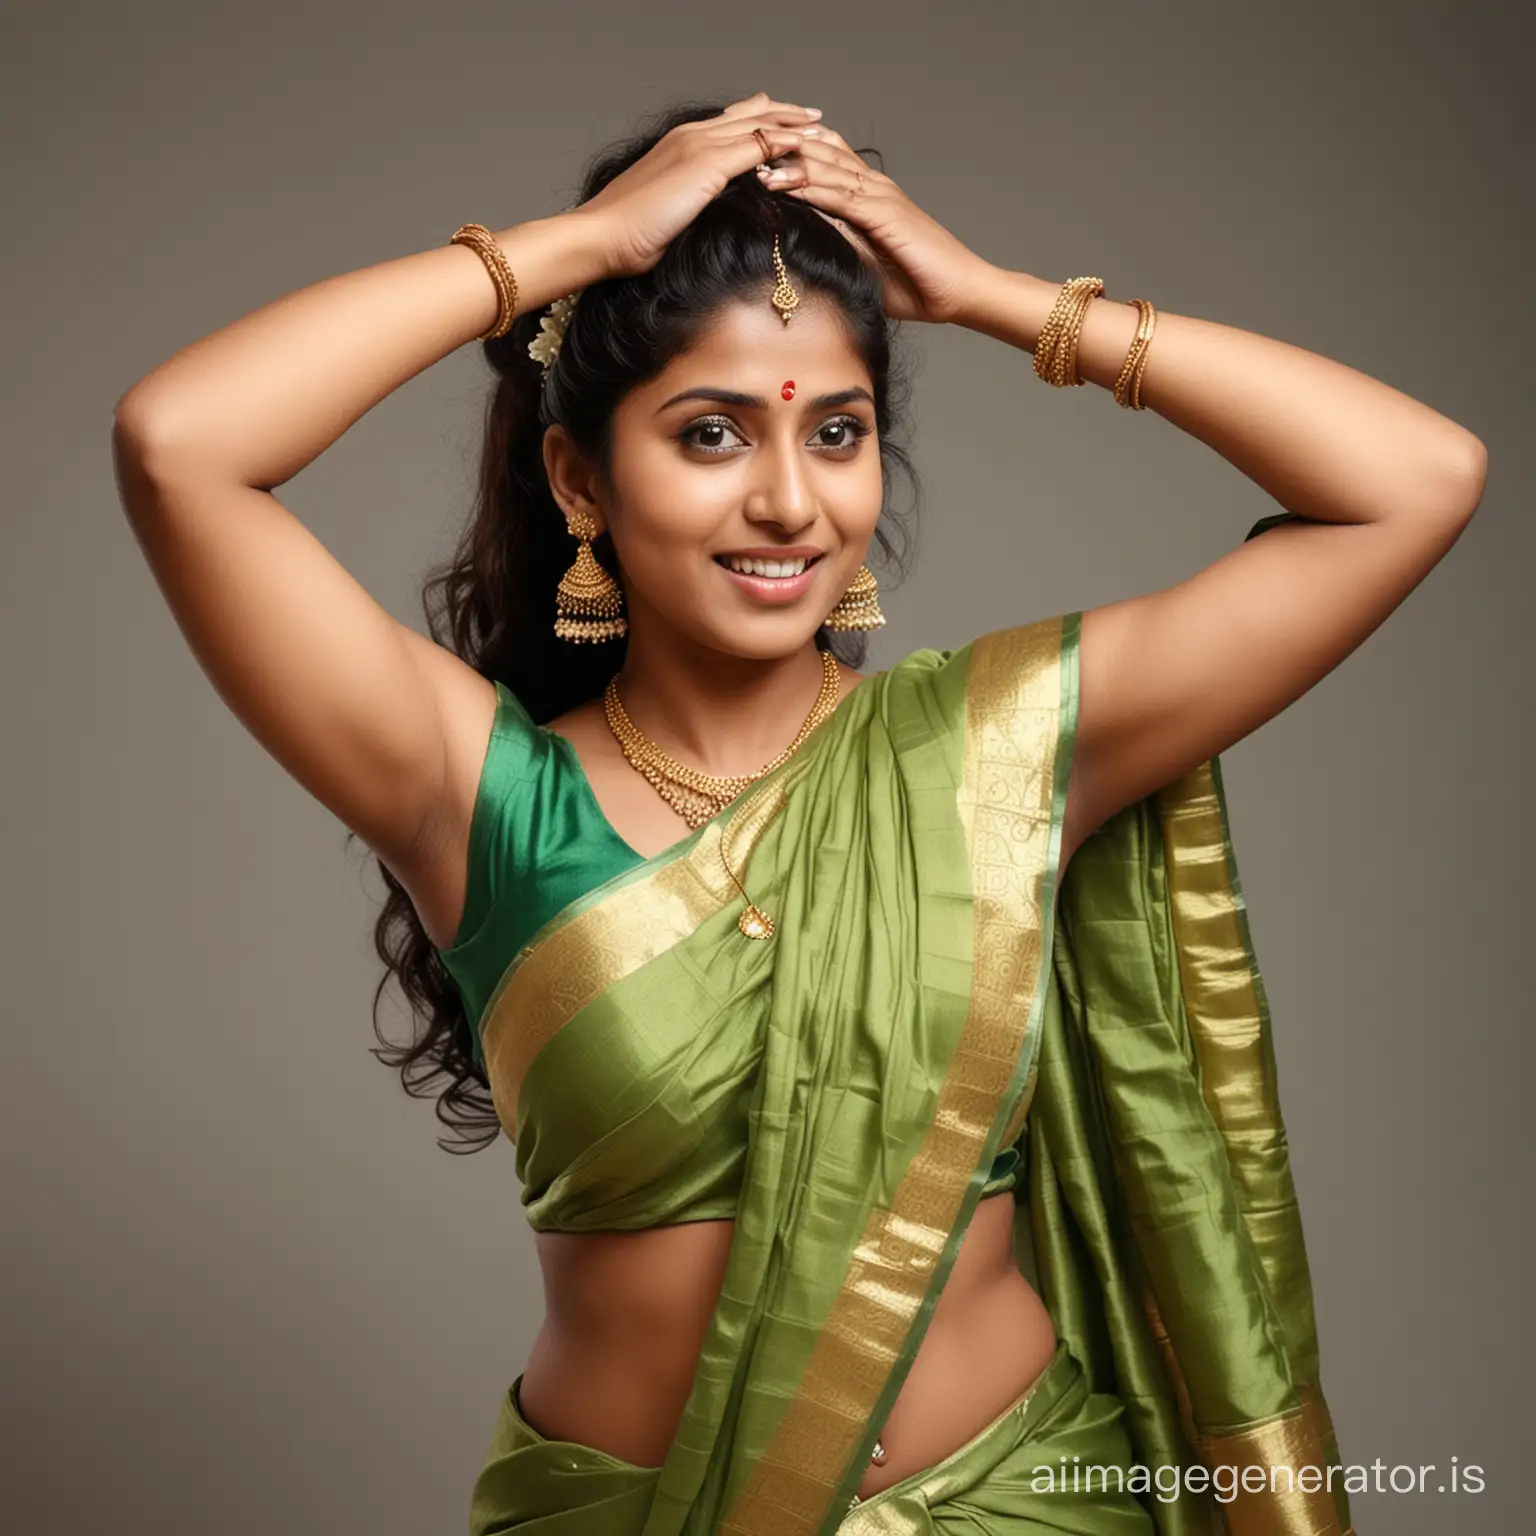 Traditional-South-Indian-Married-Women-in-Kerala-Saree-with-Raised-Hands